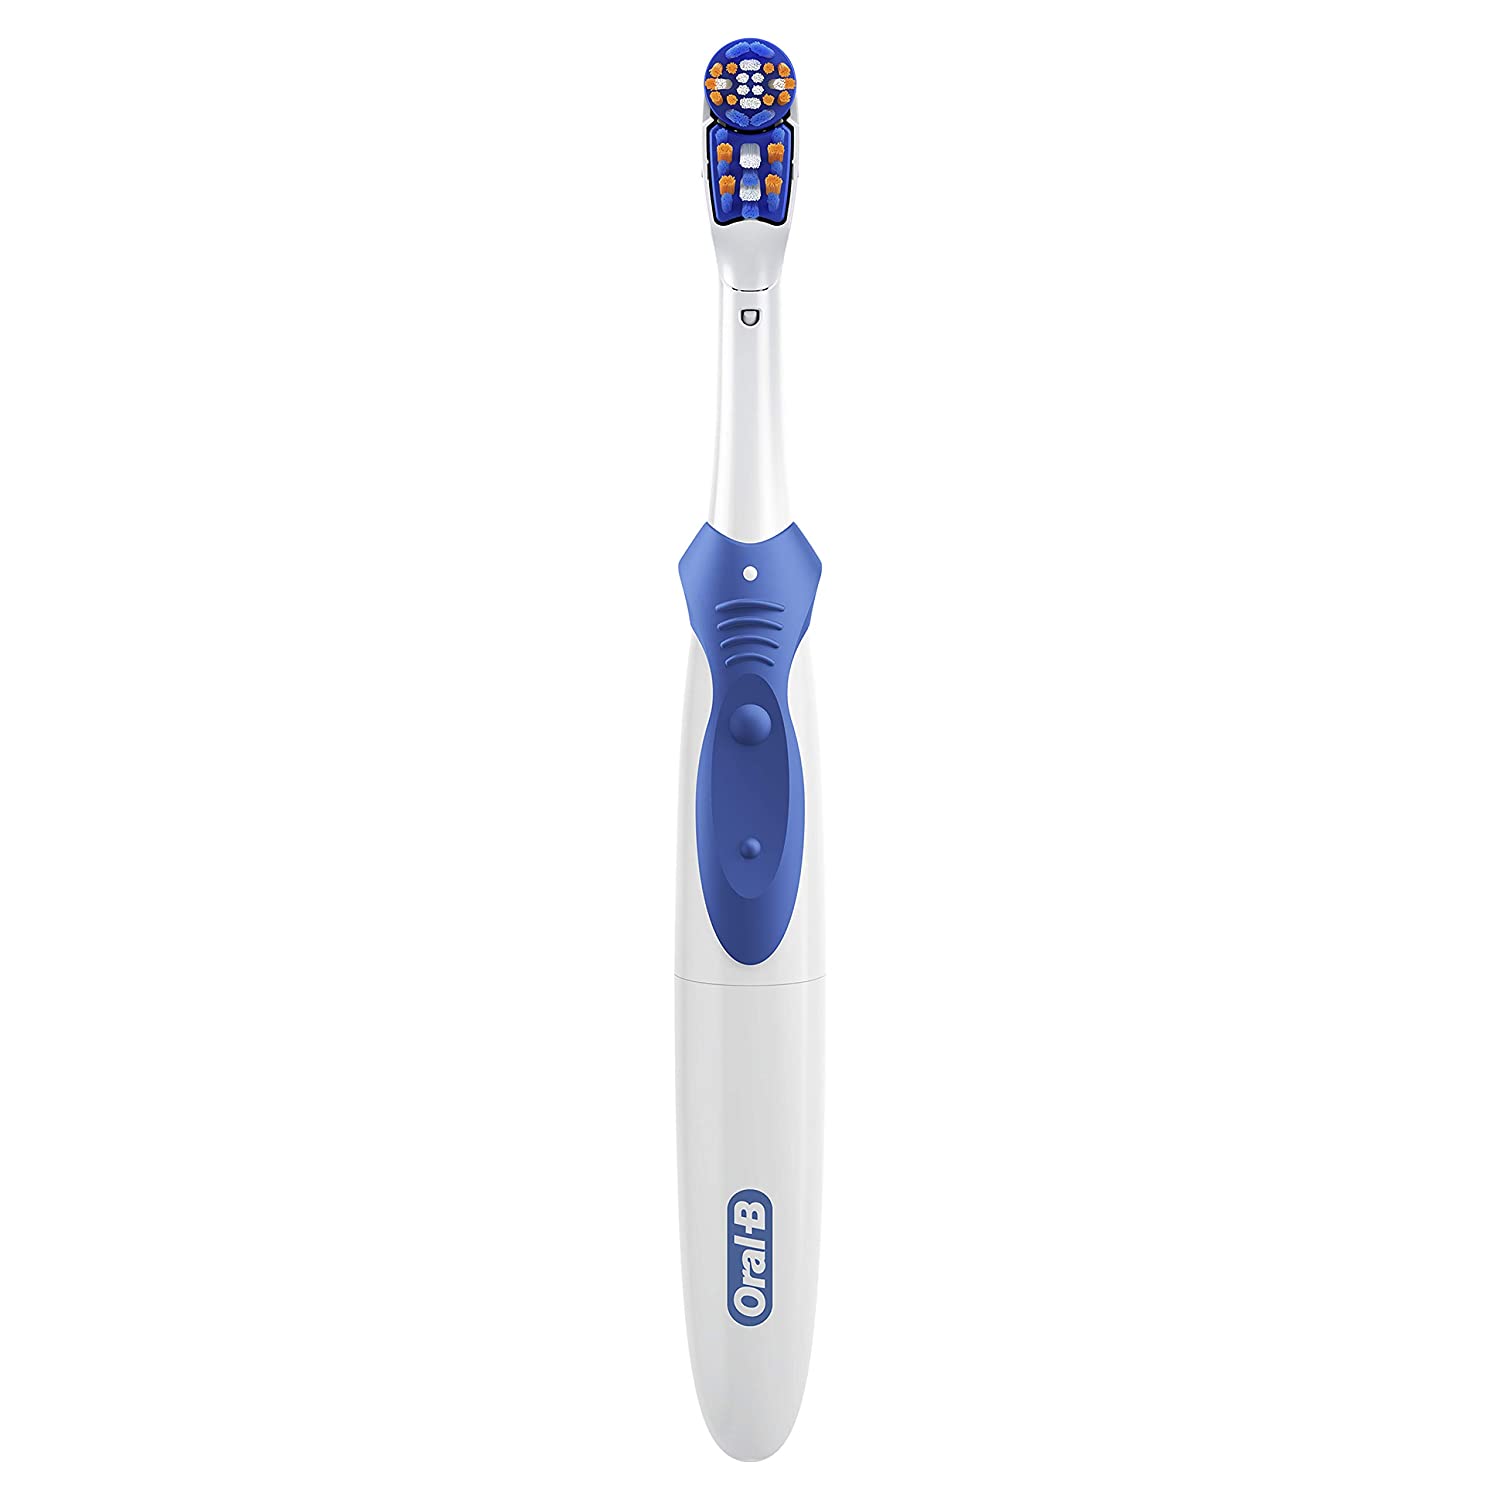 Oral-B 3D White Action Power Toothbrush (Colors May Vary) $4.22 w/ S&S + Free Shipping w/ Prime or on orders over $25